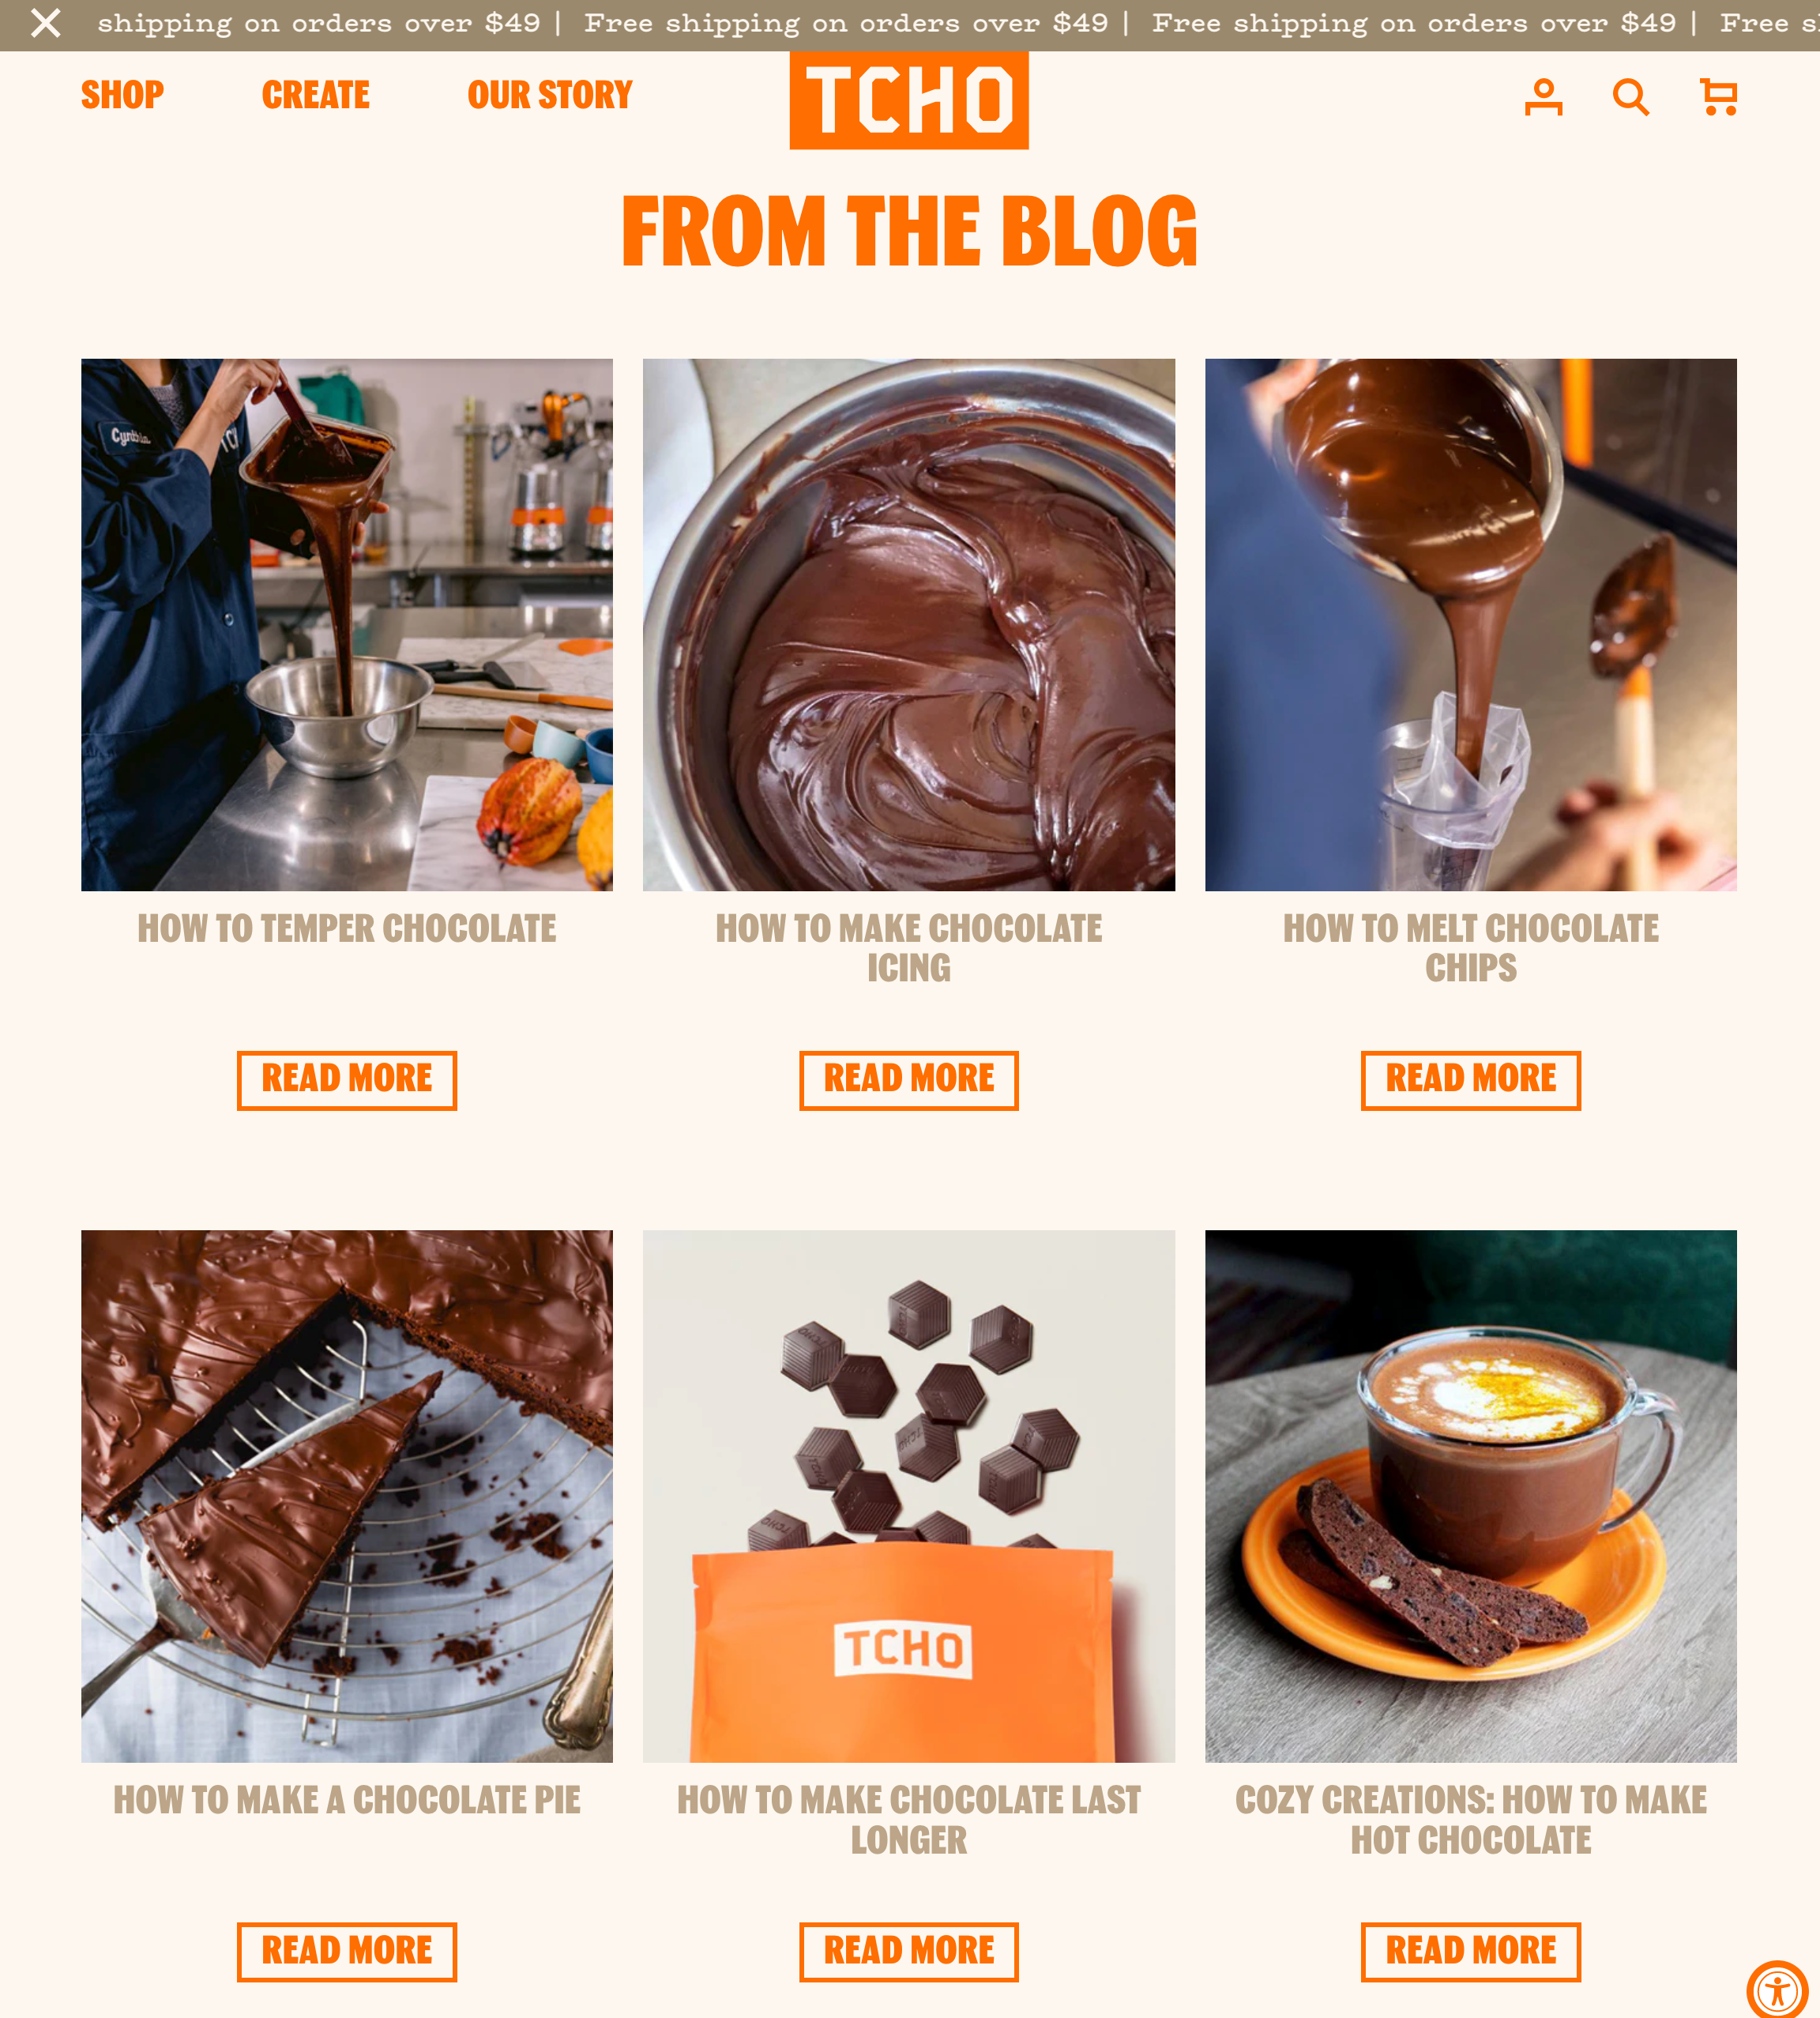 Screenshot of TCHO Cholocate's blog post page highlighting six how-to articles such as how to make chocolate last longer.